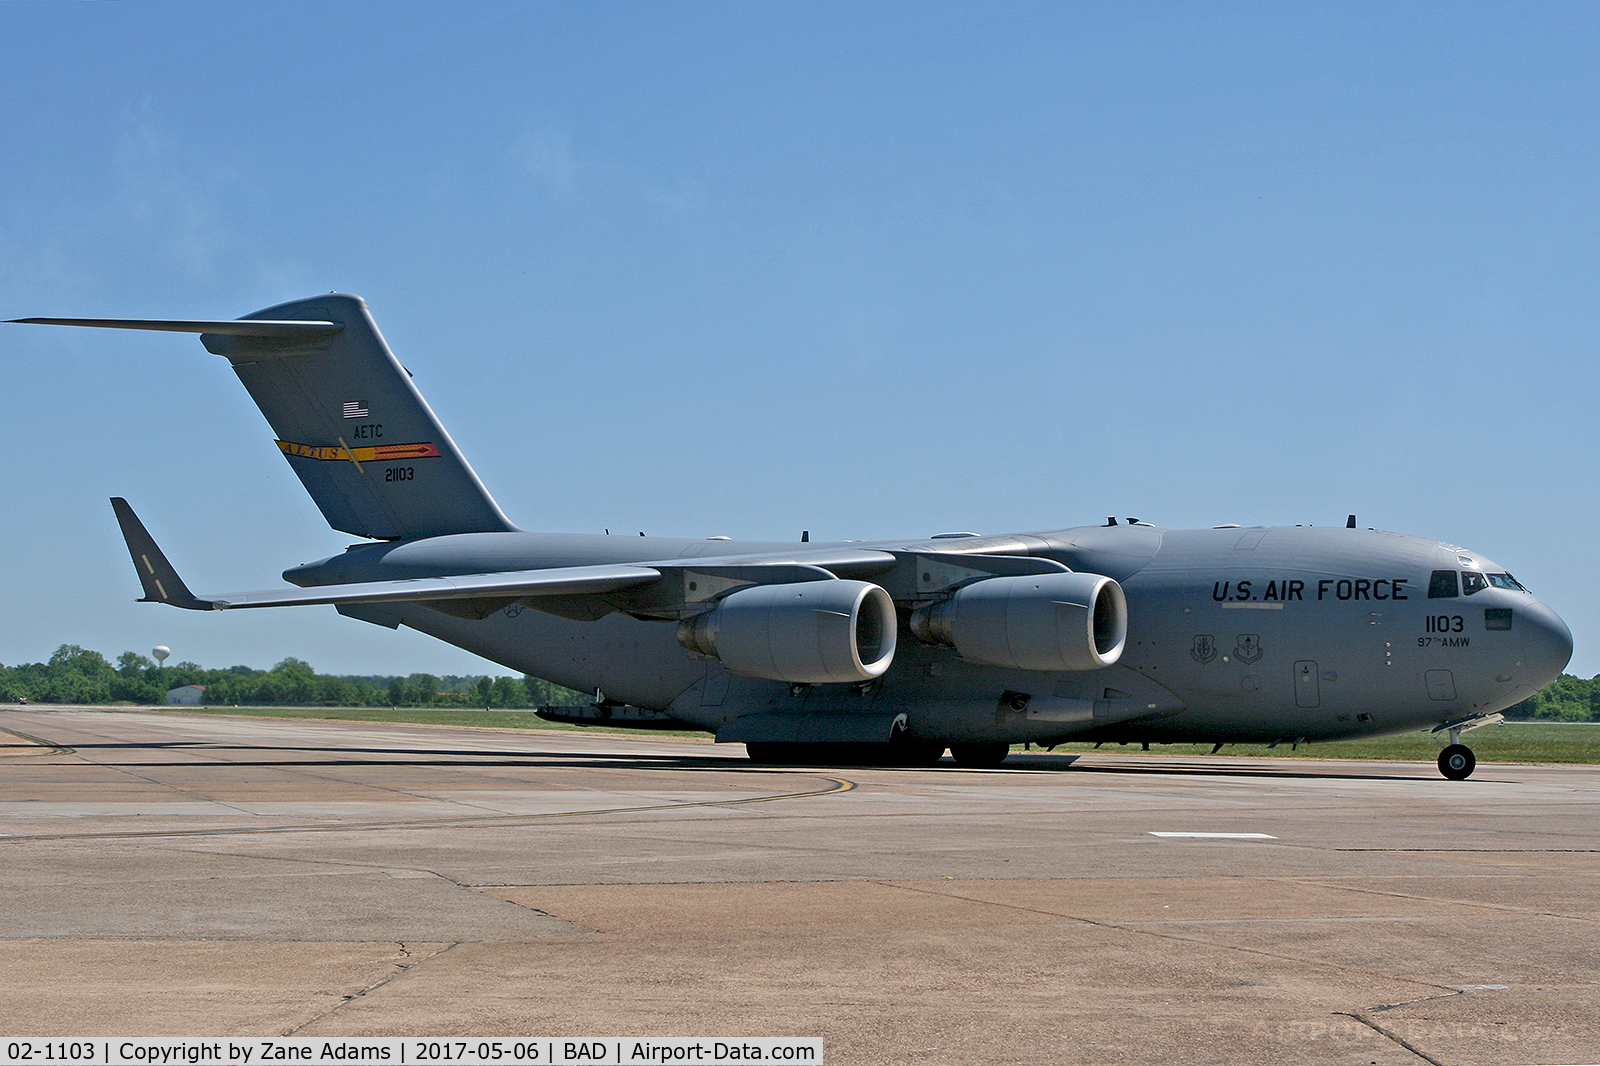 02-1103, 2002 Boeing C-17A Globemaster III C/N P-103, At the 2017 Barksdale AFB Airshow